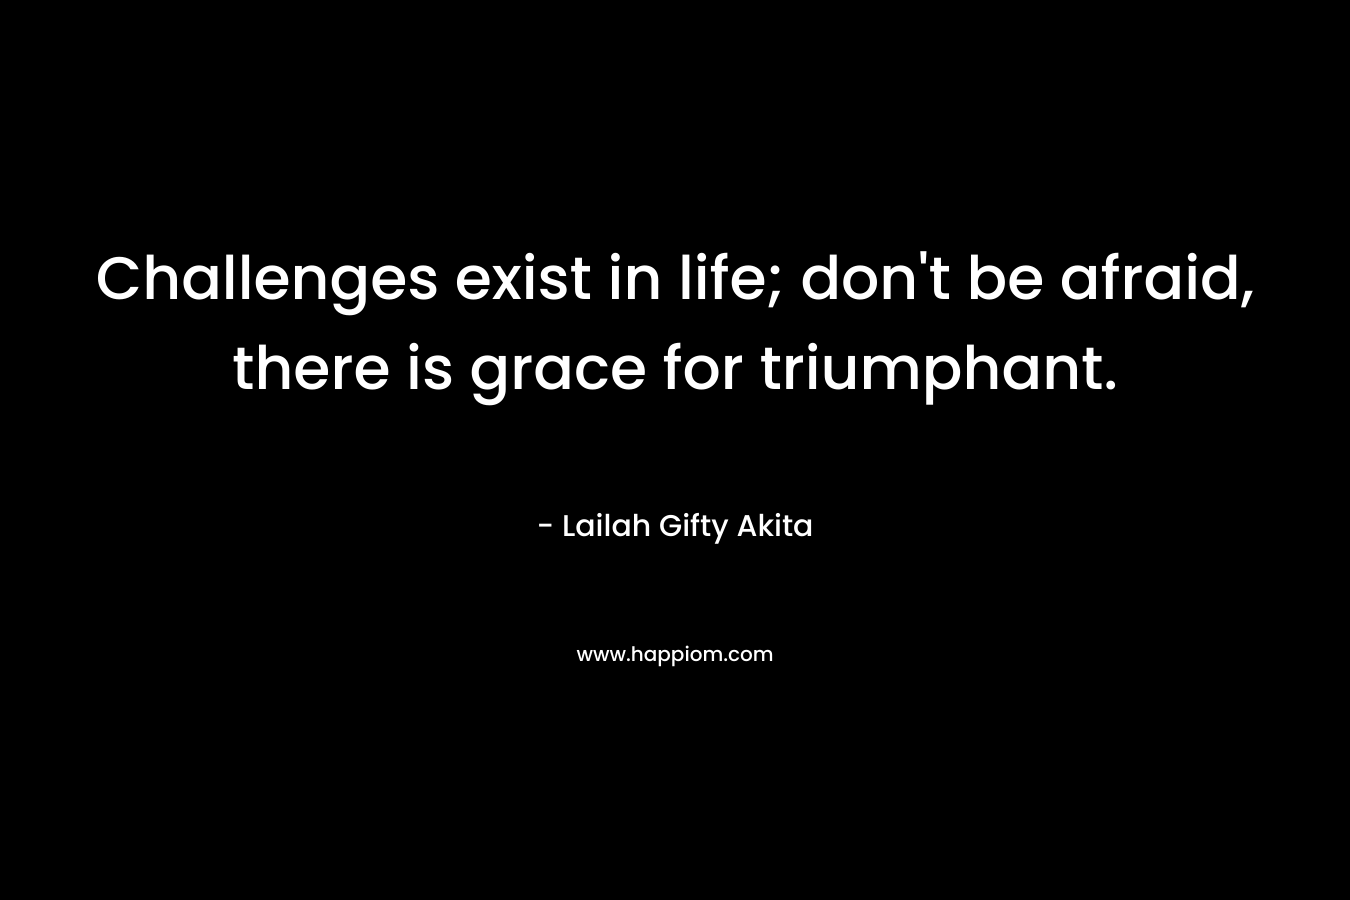 Challenges exist in life; don’t be afraid, there is grace for triumphant. – Lailah Gifty Akita